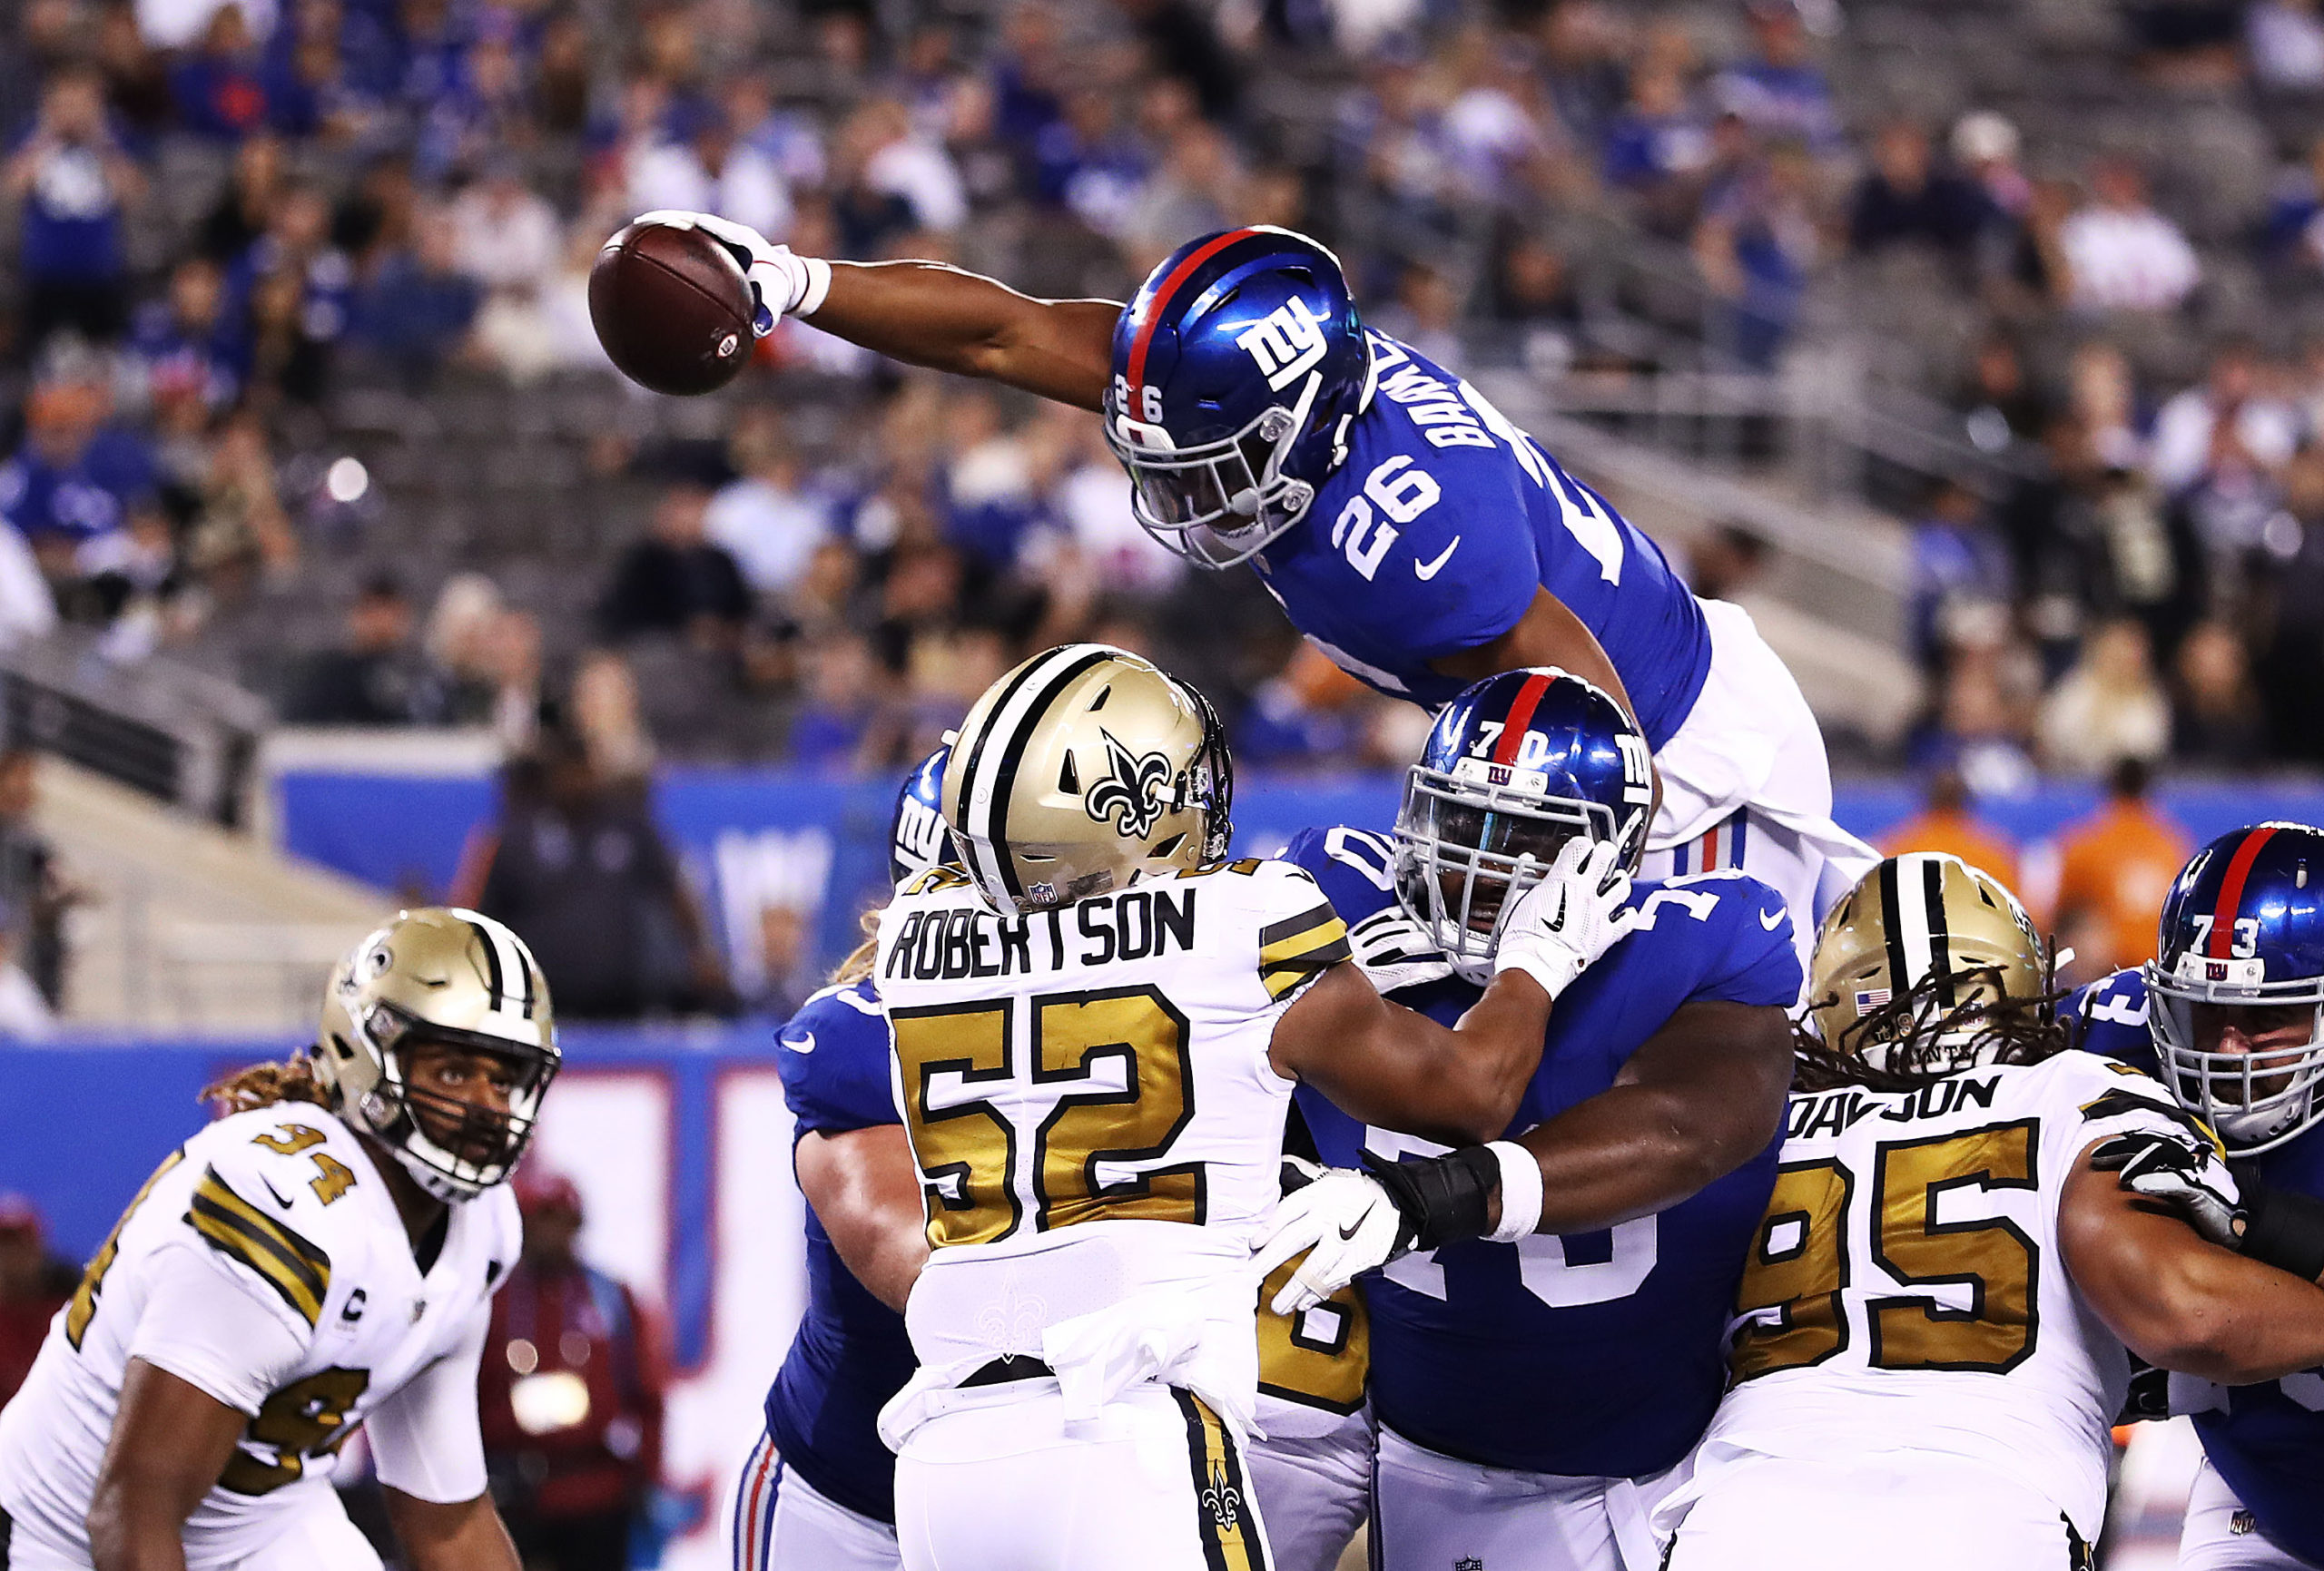 EAST RUTHERFORD, NEW JERSEY - SEPTEMBER 30: Saquon Barkley #26 of the New York Giants scores a touchdown in the fourth Quarter against the New Orleans Saints during their game at MetLife Stadium on September 30, 2018 in East Rutherford, New Jersey. Al Bello/Getty Images